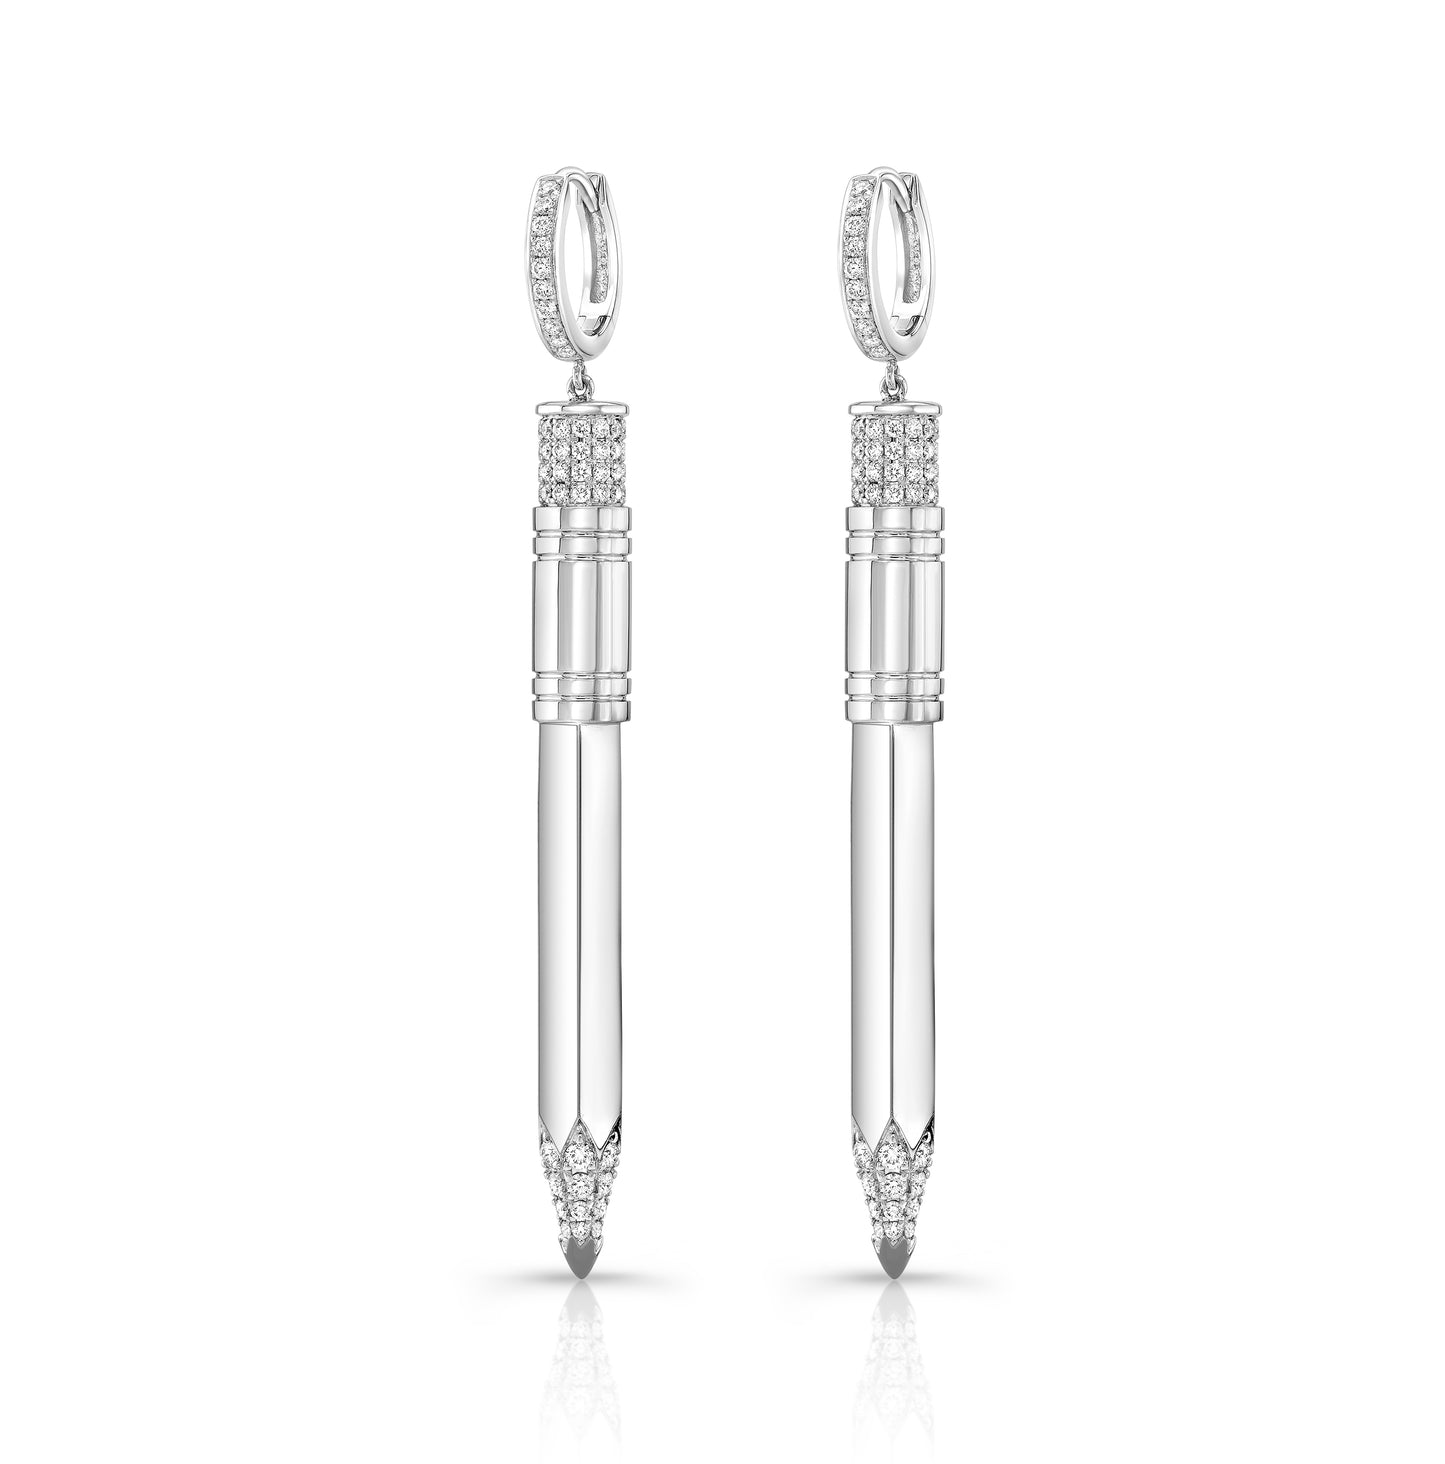 Expression Maxi Vertical Earrings